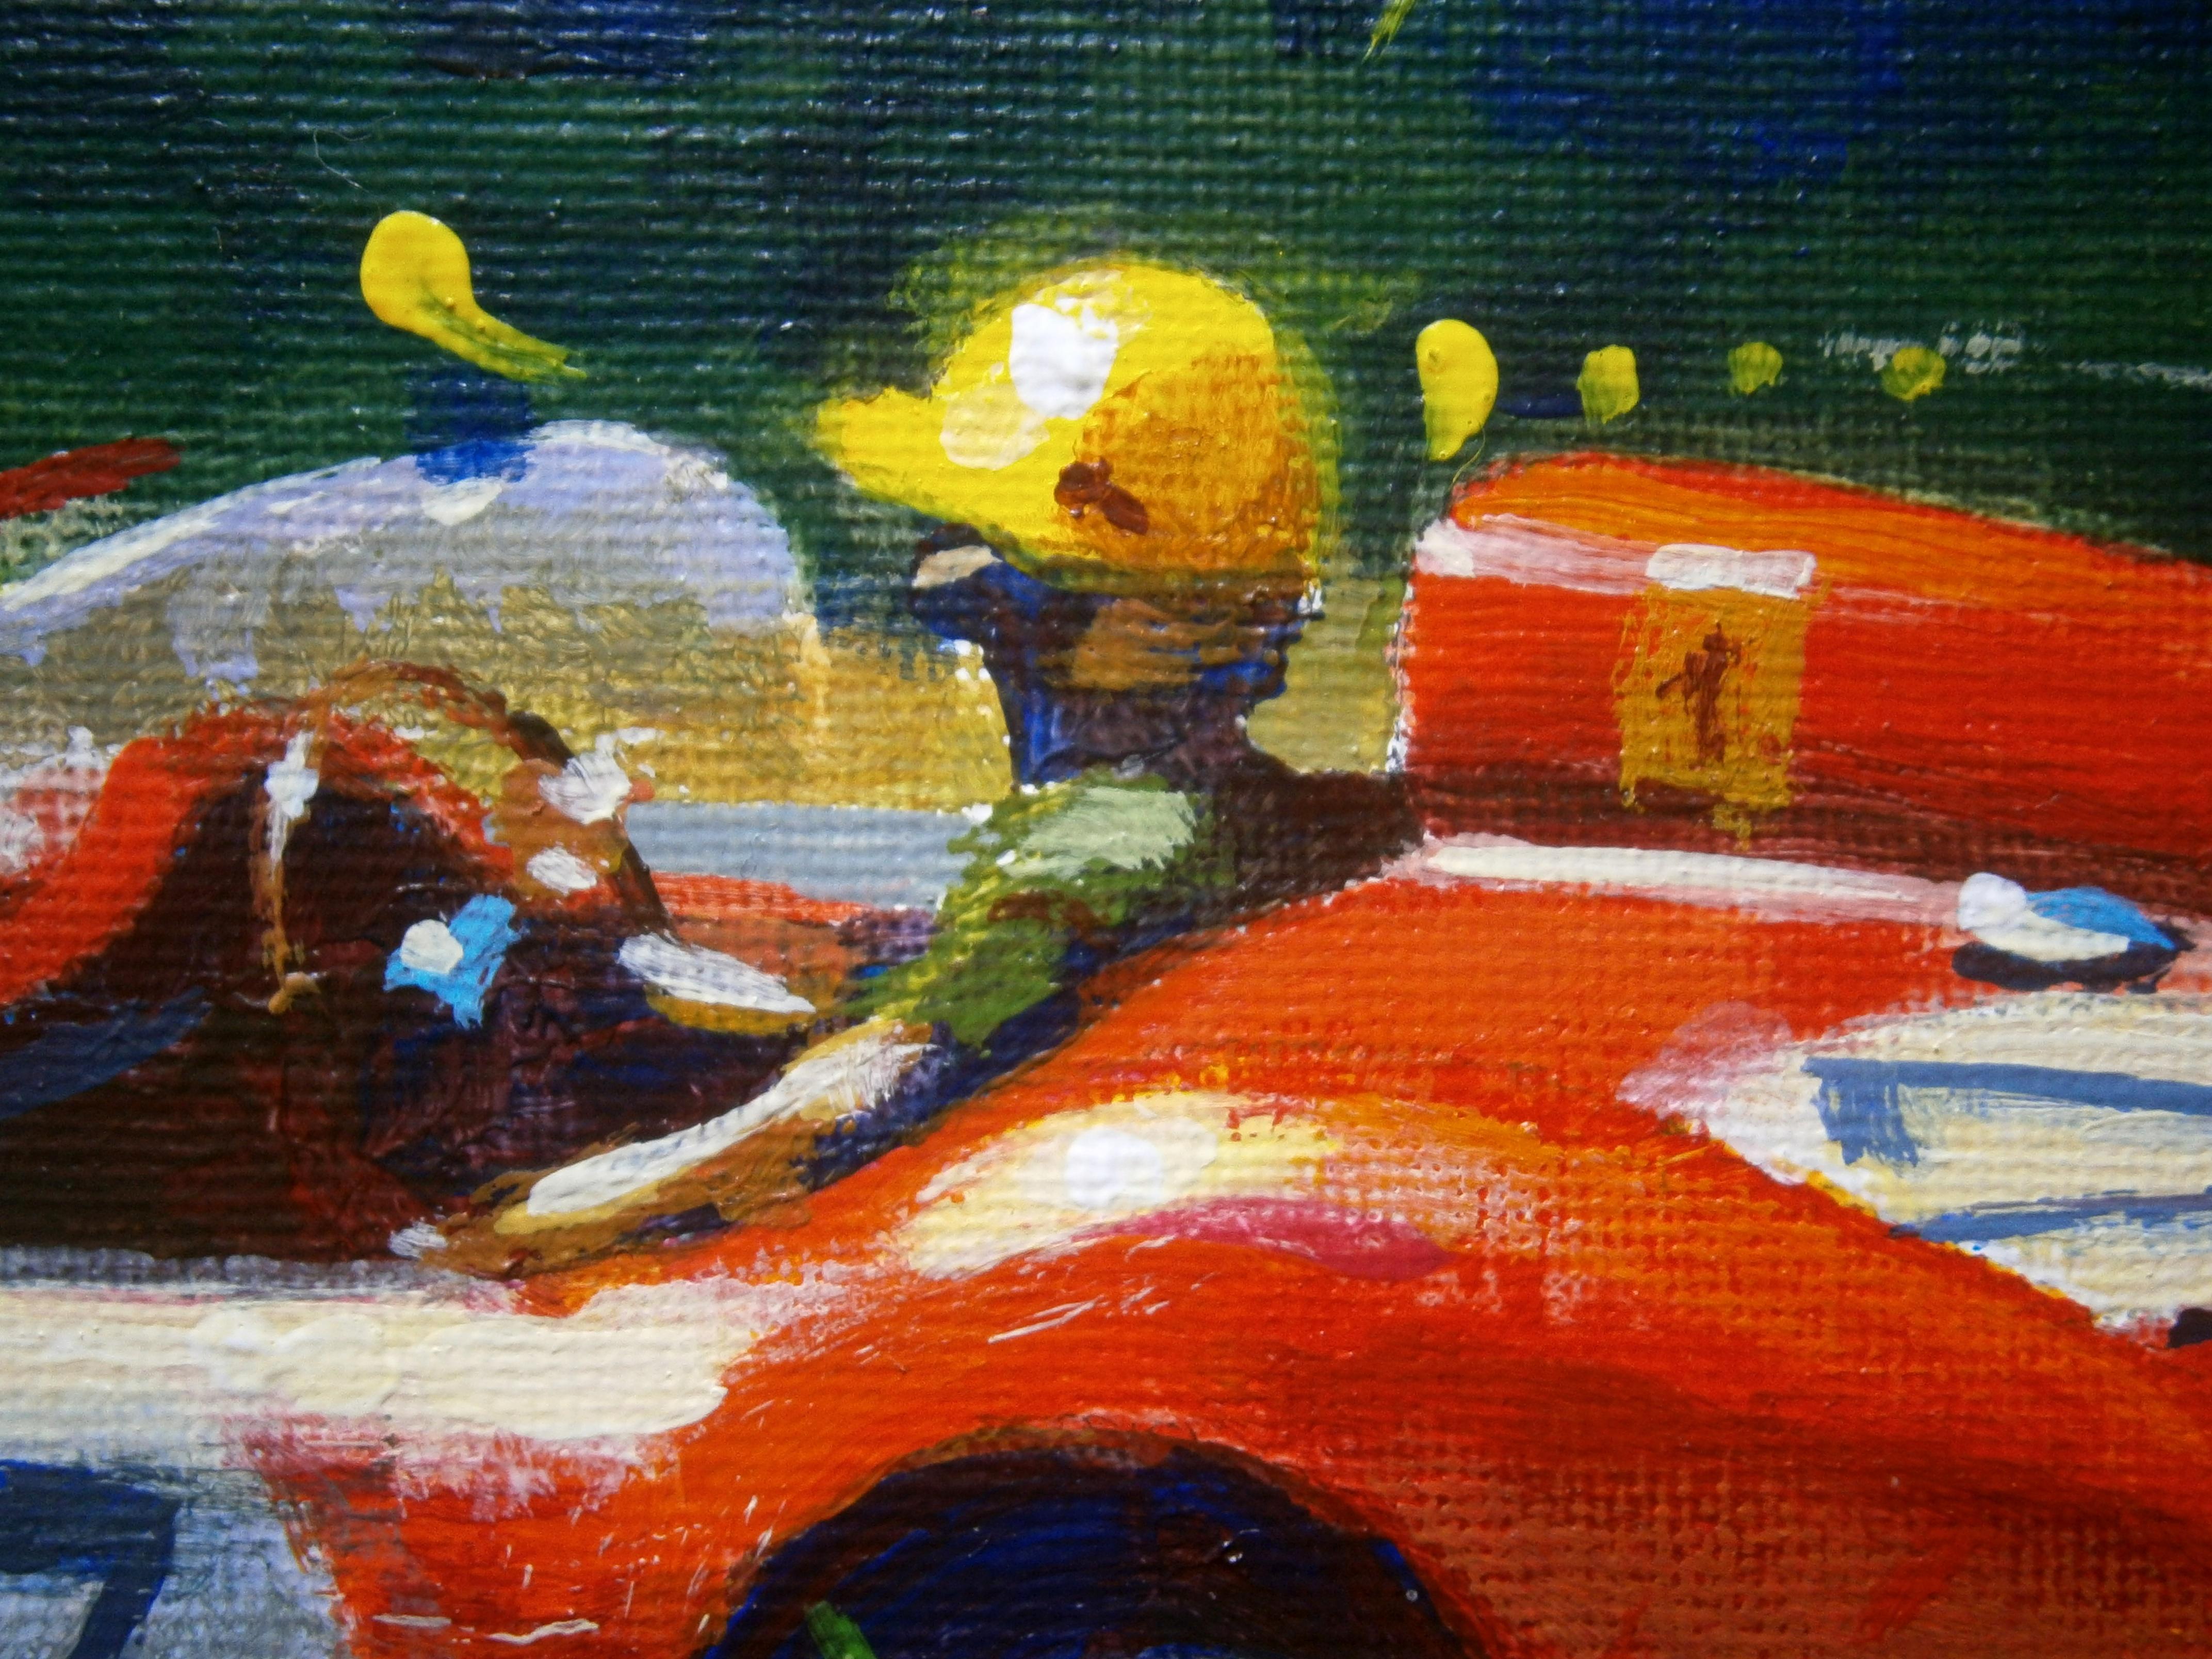 BALAGUER , Alex ( Barcelona 1968 )
During early childhood, Àlex Balaguer began to sketch motorcars symbolic of Maranello’s trademark vehicle.
Self-taught in the art world, Balaguer decided to unite his big love of motoring and painting. Ferrari is